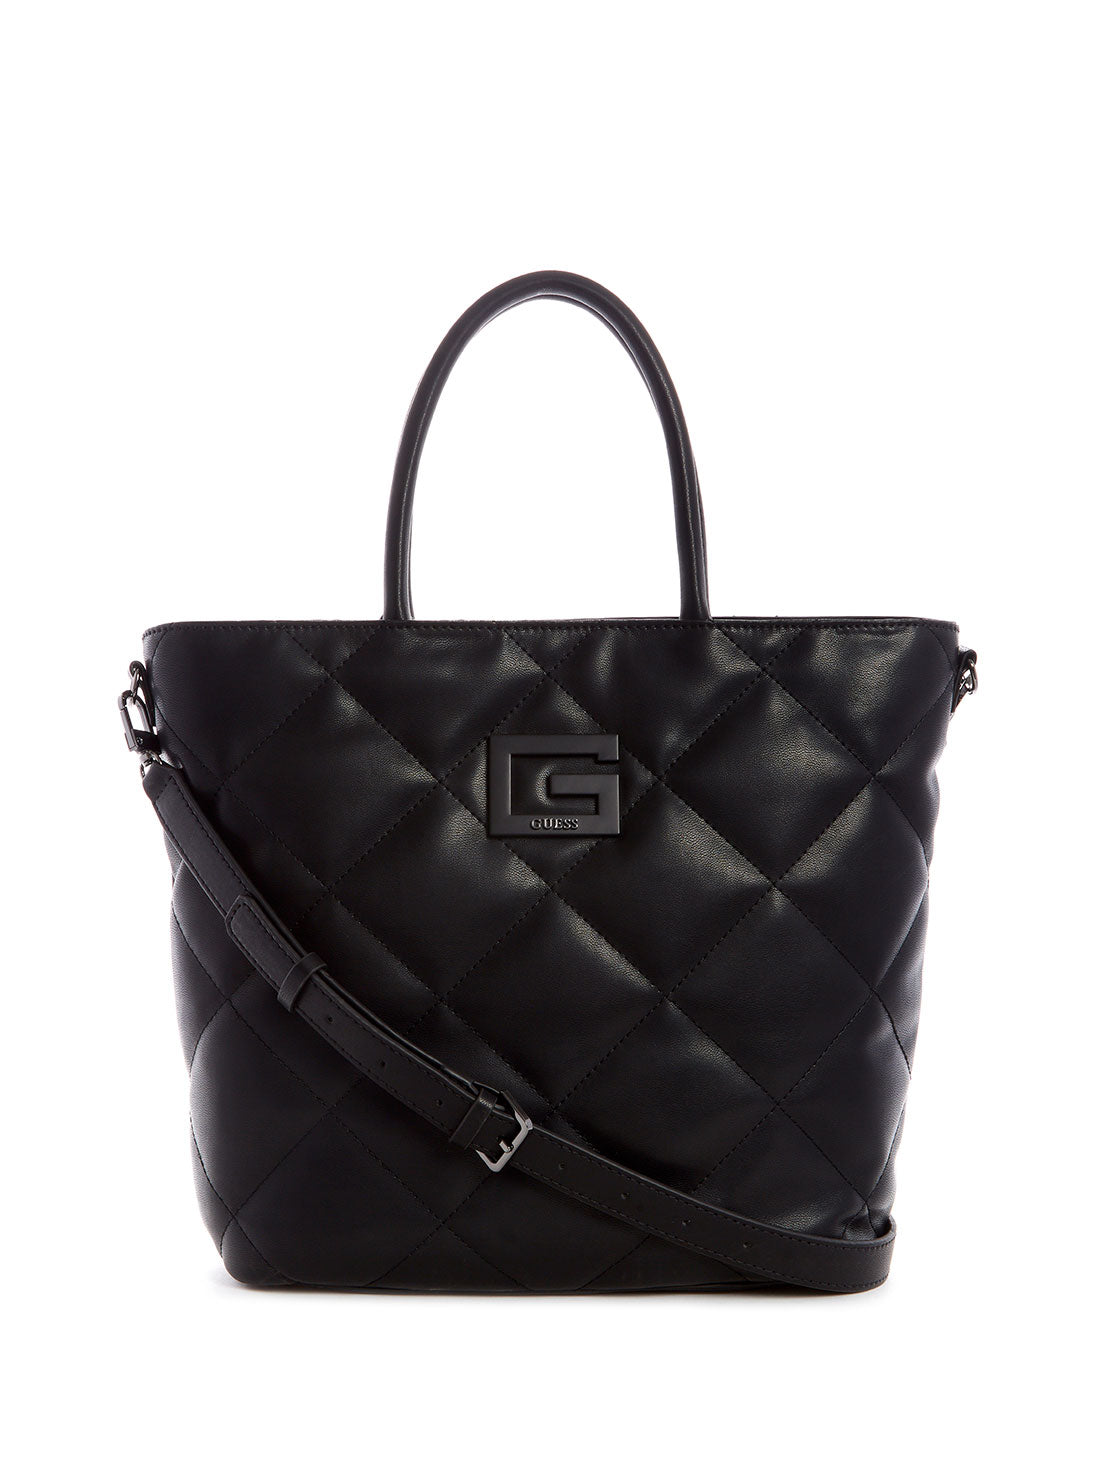 GUESS Womens Black Quilted Brightside Tote Bag QM758023 Front View